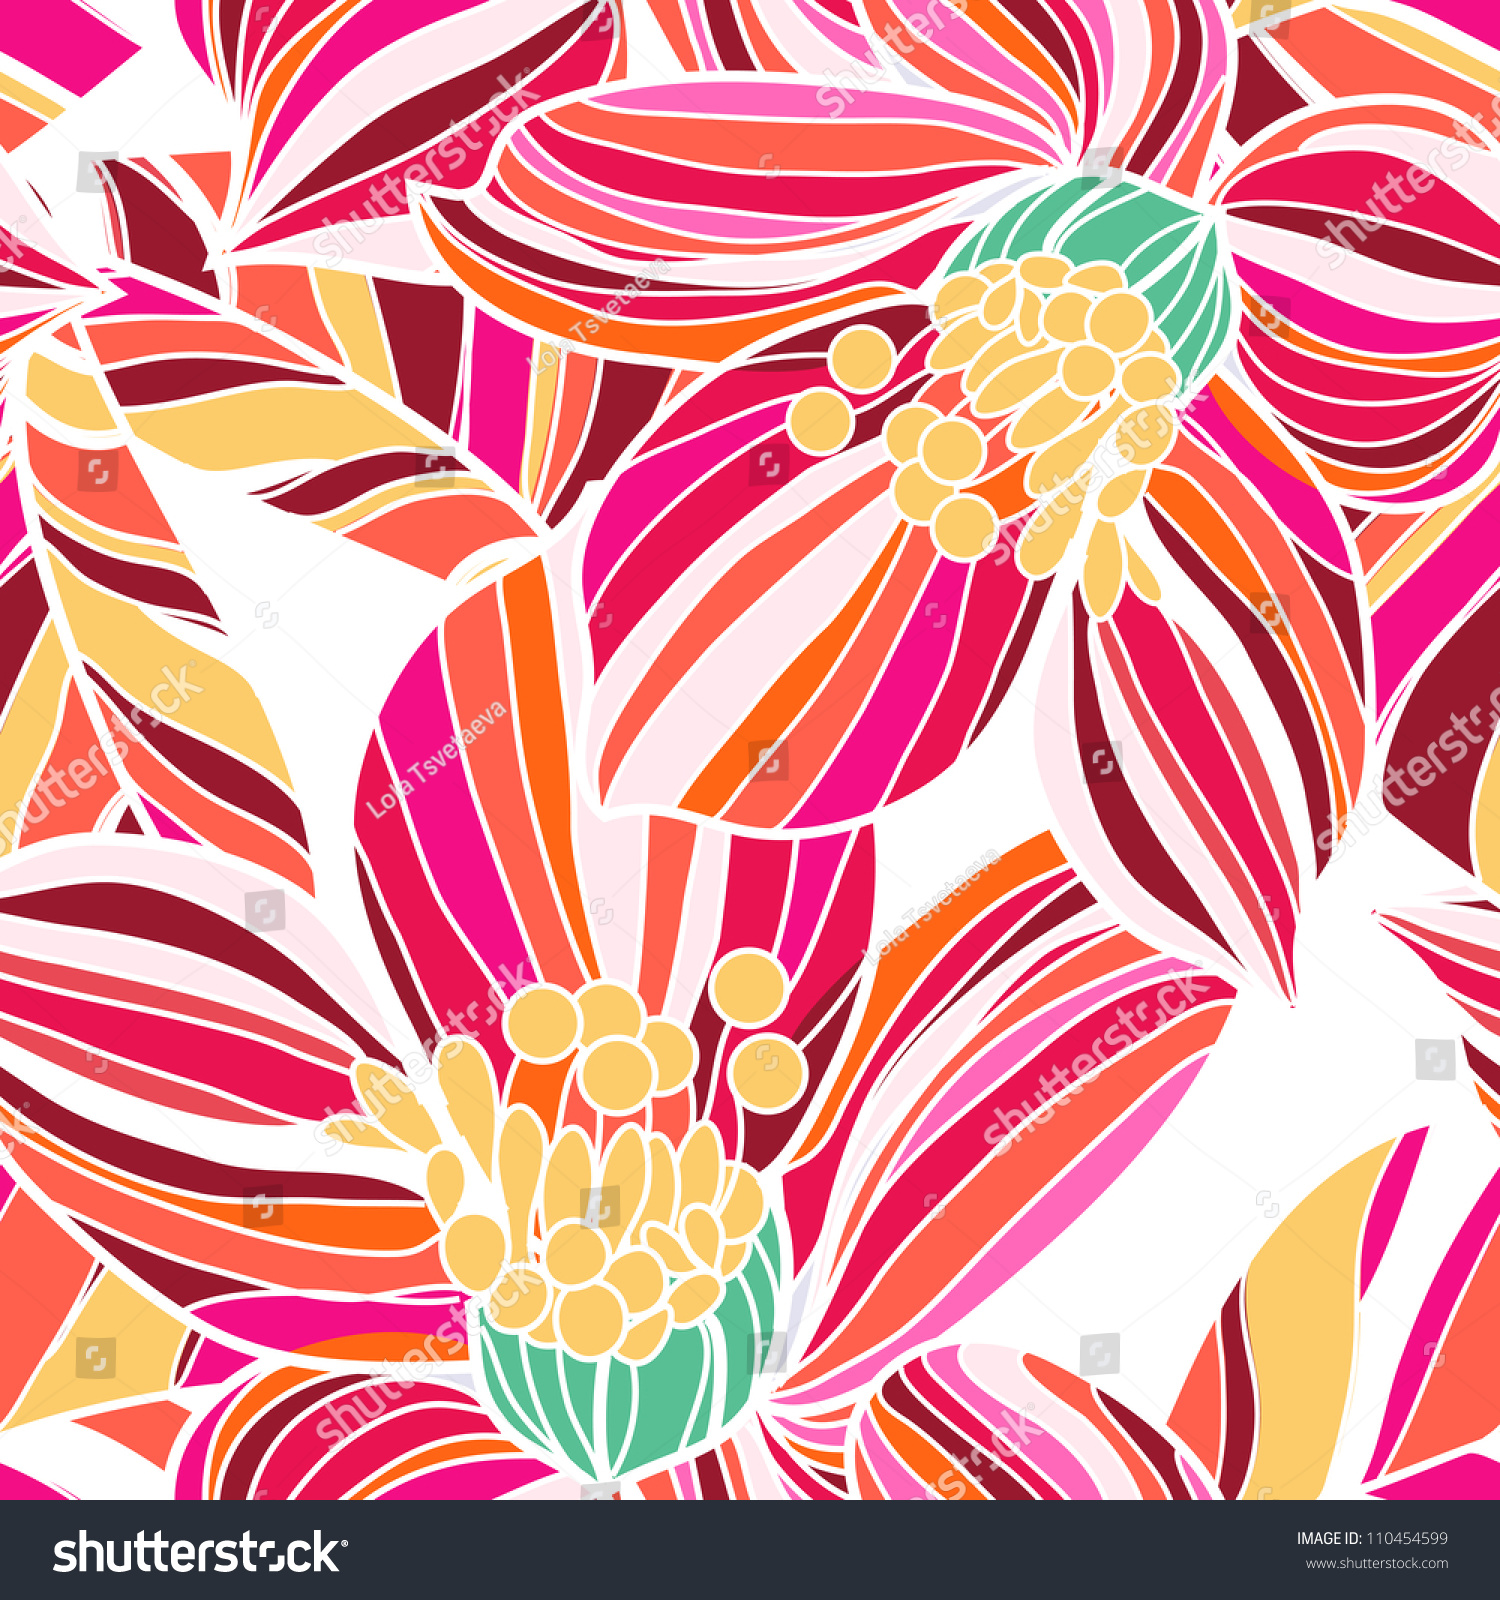 Seamless Vector Texture With Flowers - 110454599 : Shutterstock